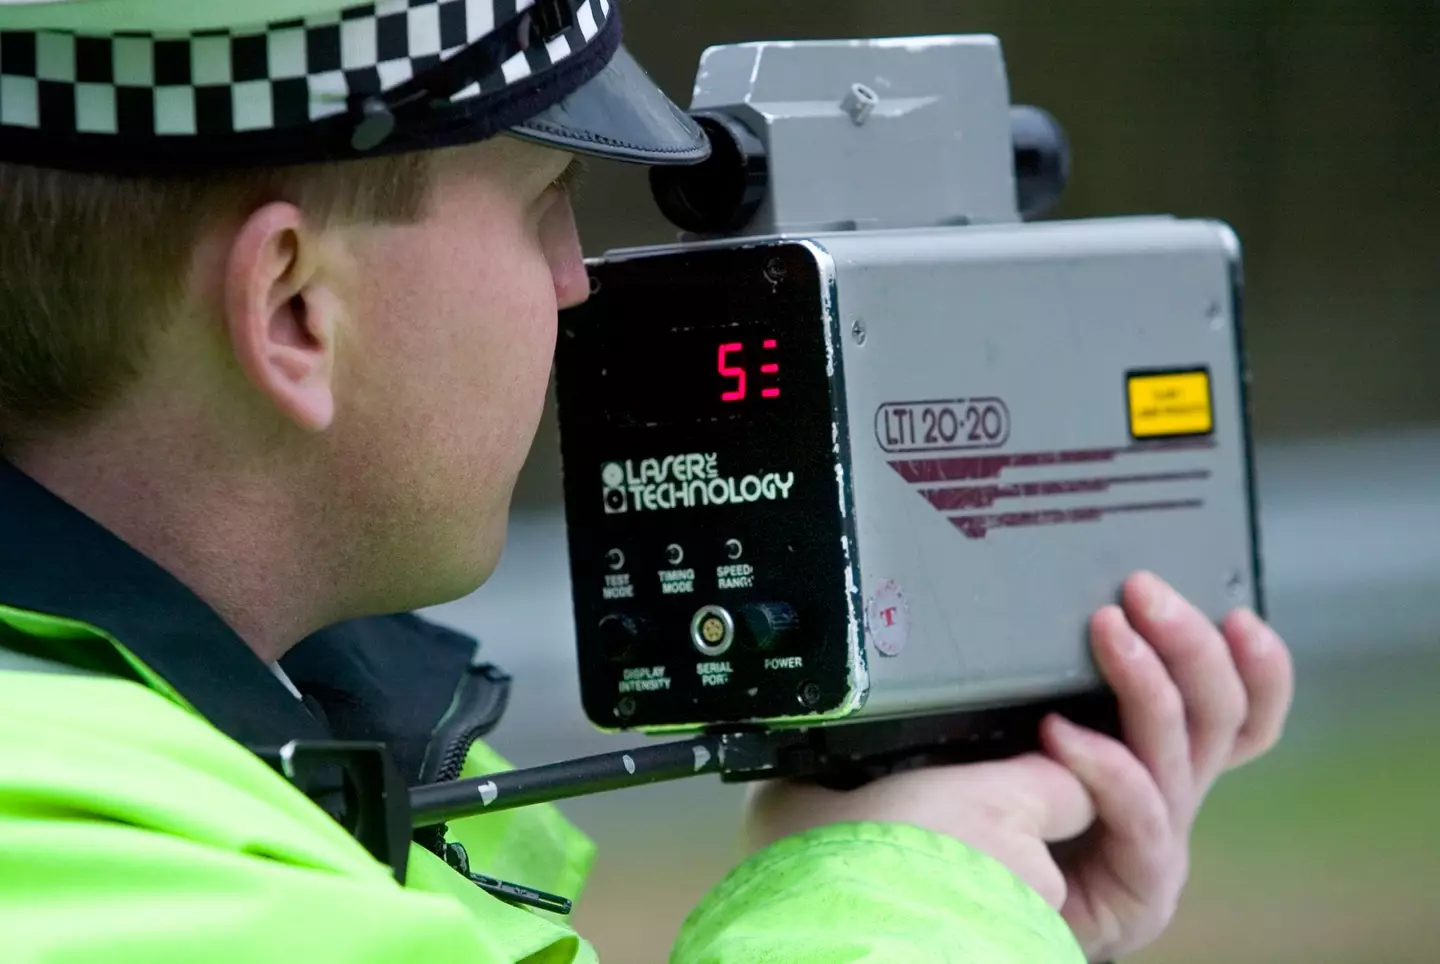 It turns out that UK police lowered the speeding threshold on the q.t which has lead to a reported surge in fines.